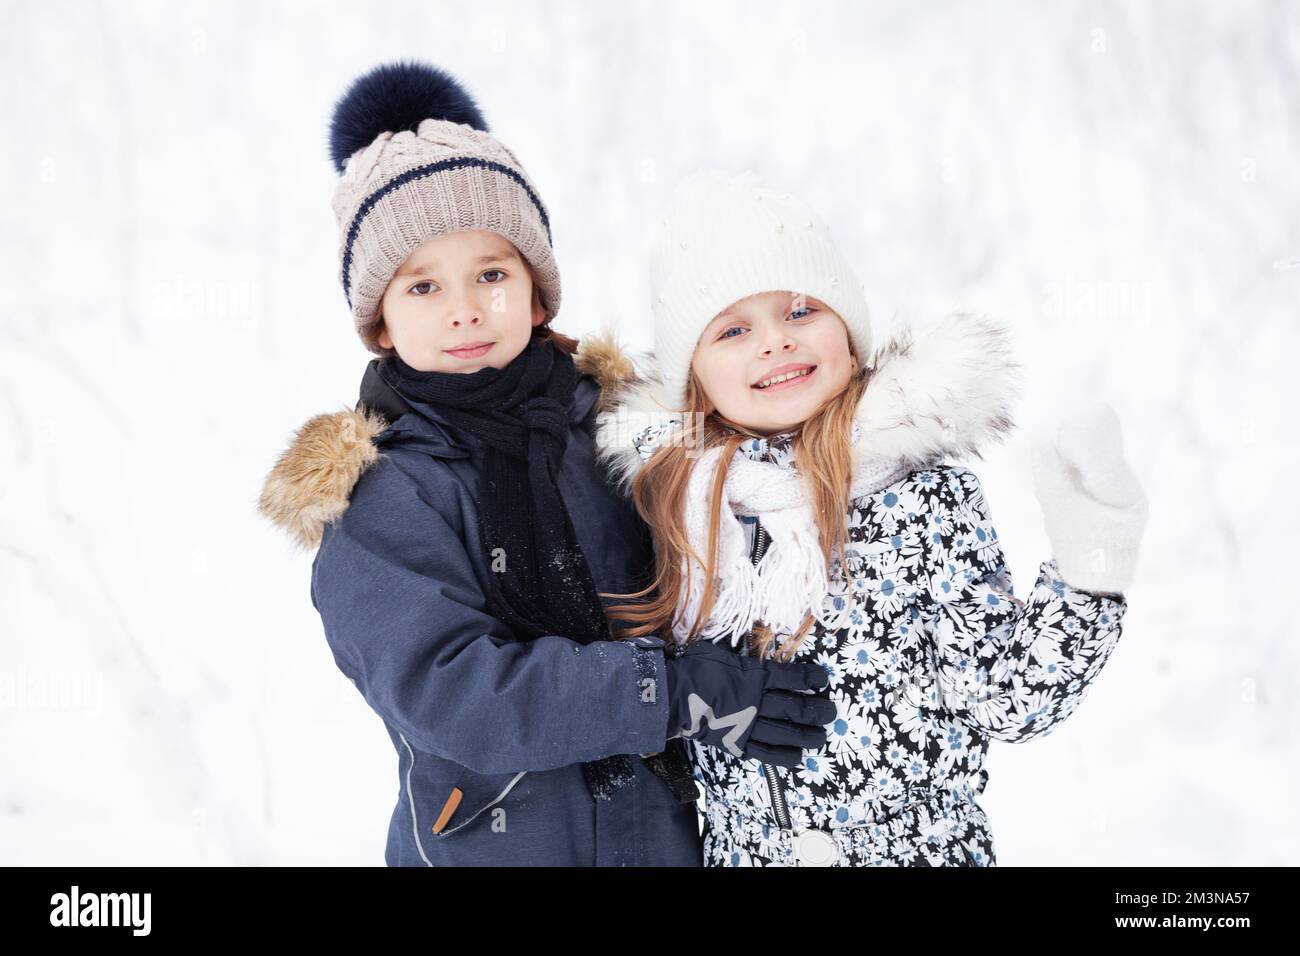 Children Wearing Snow Clothes In Winter High-Res Stock Photo